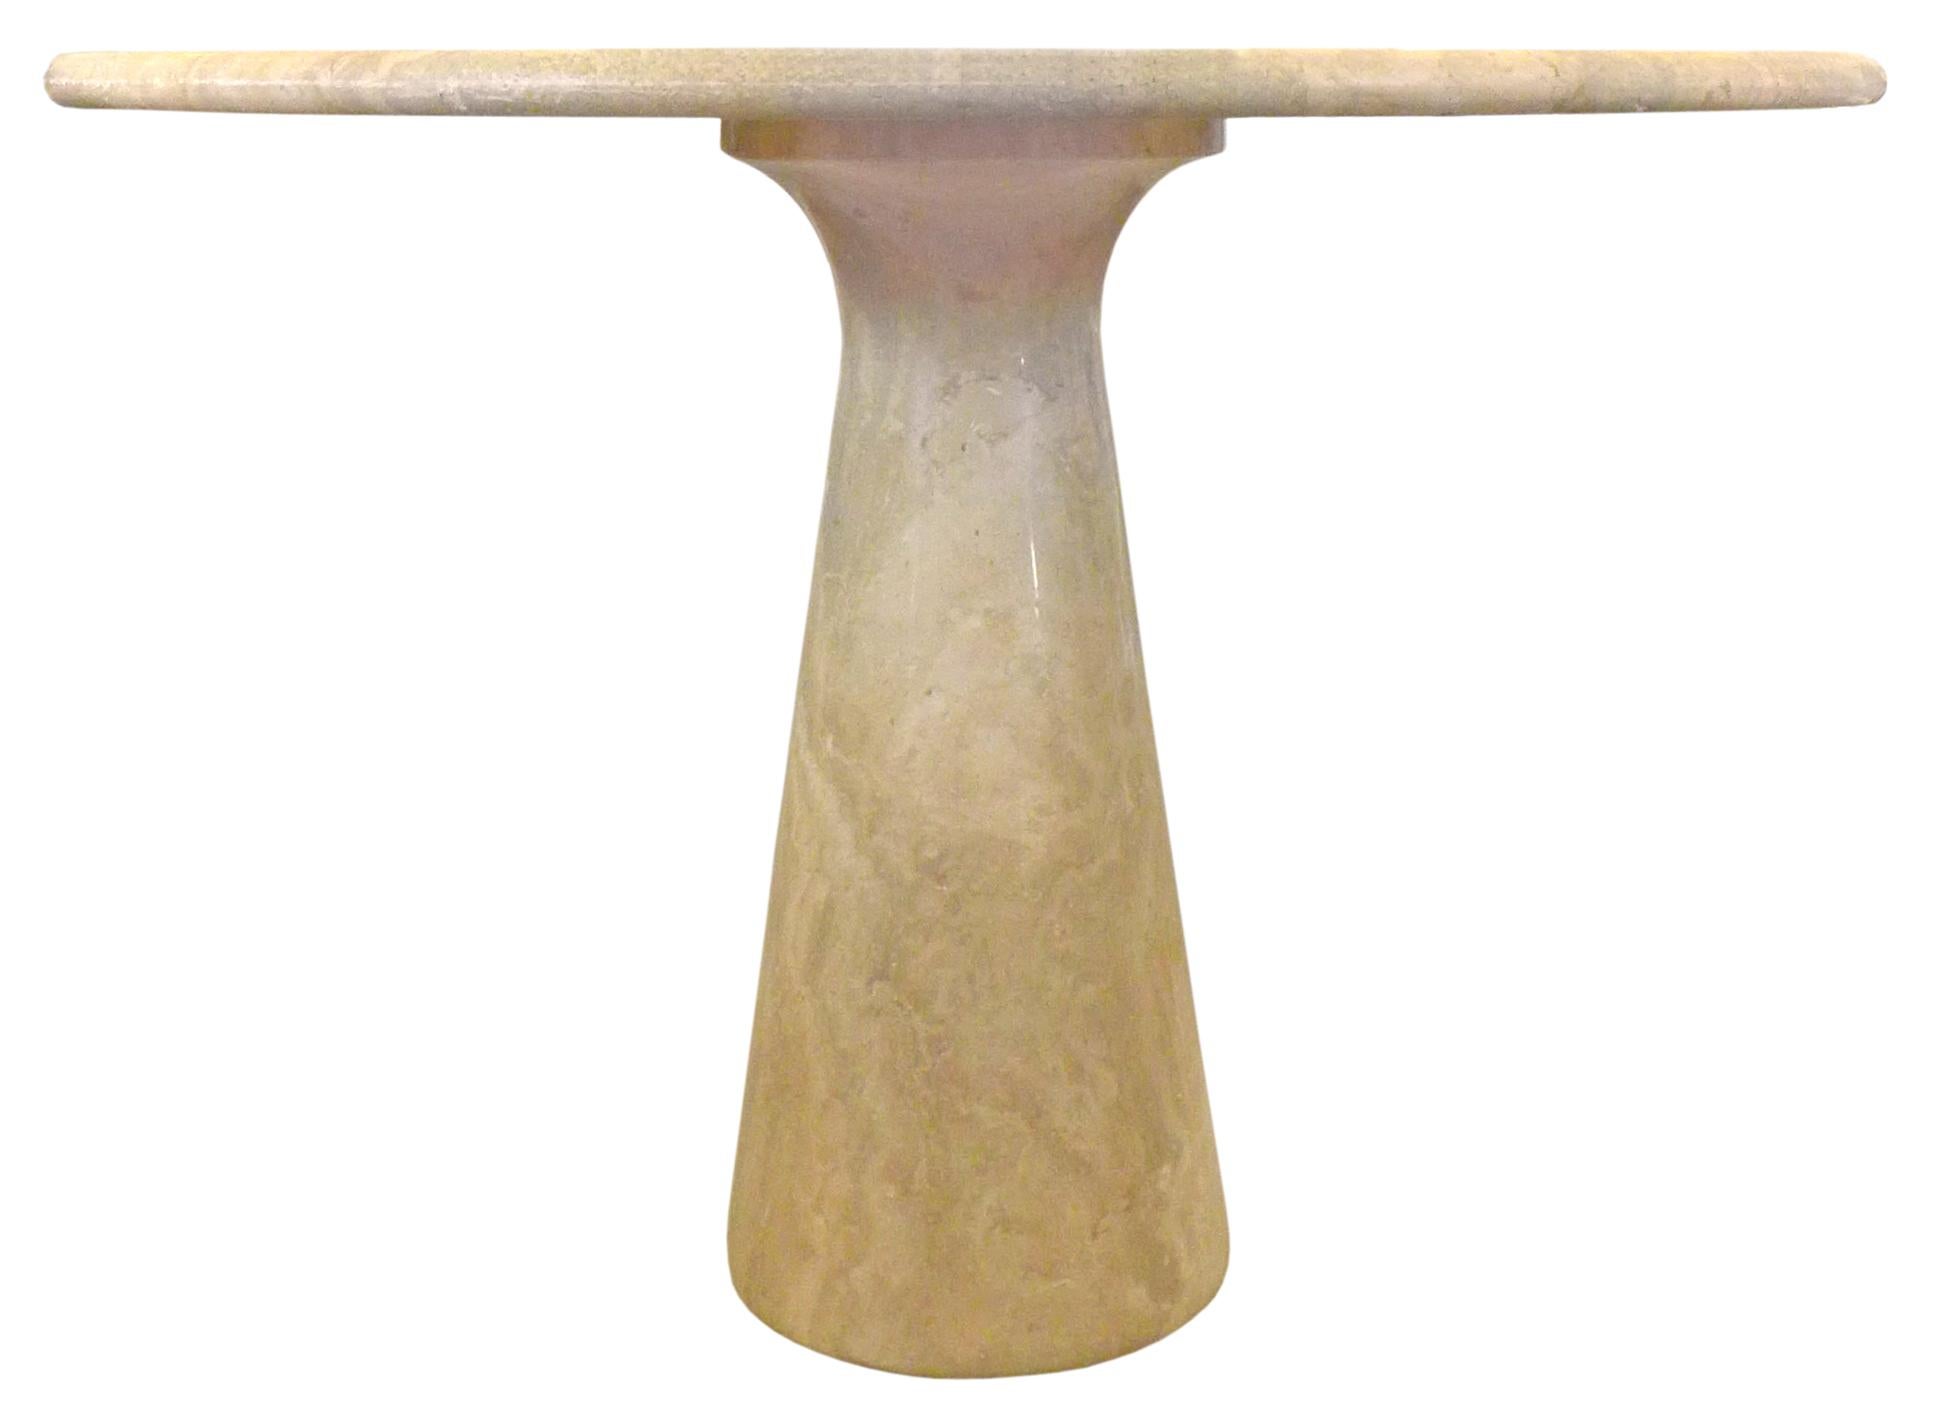 A fantastic round, travertine, pedestal-base dining table in the manner of Angelo Mangiarotti. Classic stucco-and-polished stone with a pleasant oatmeal hue and beautiful striation, veining throughout. Impressive scale, design and material, a